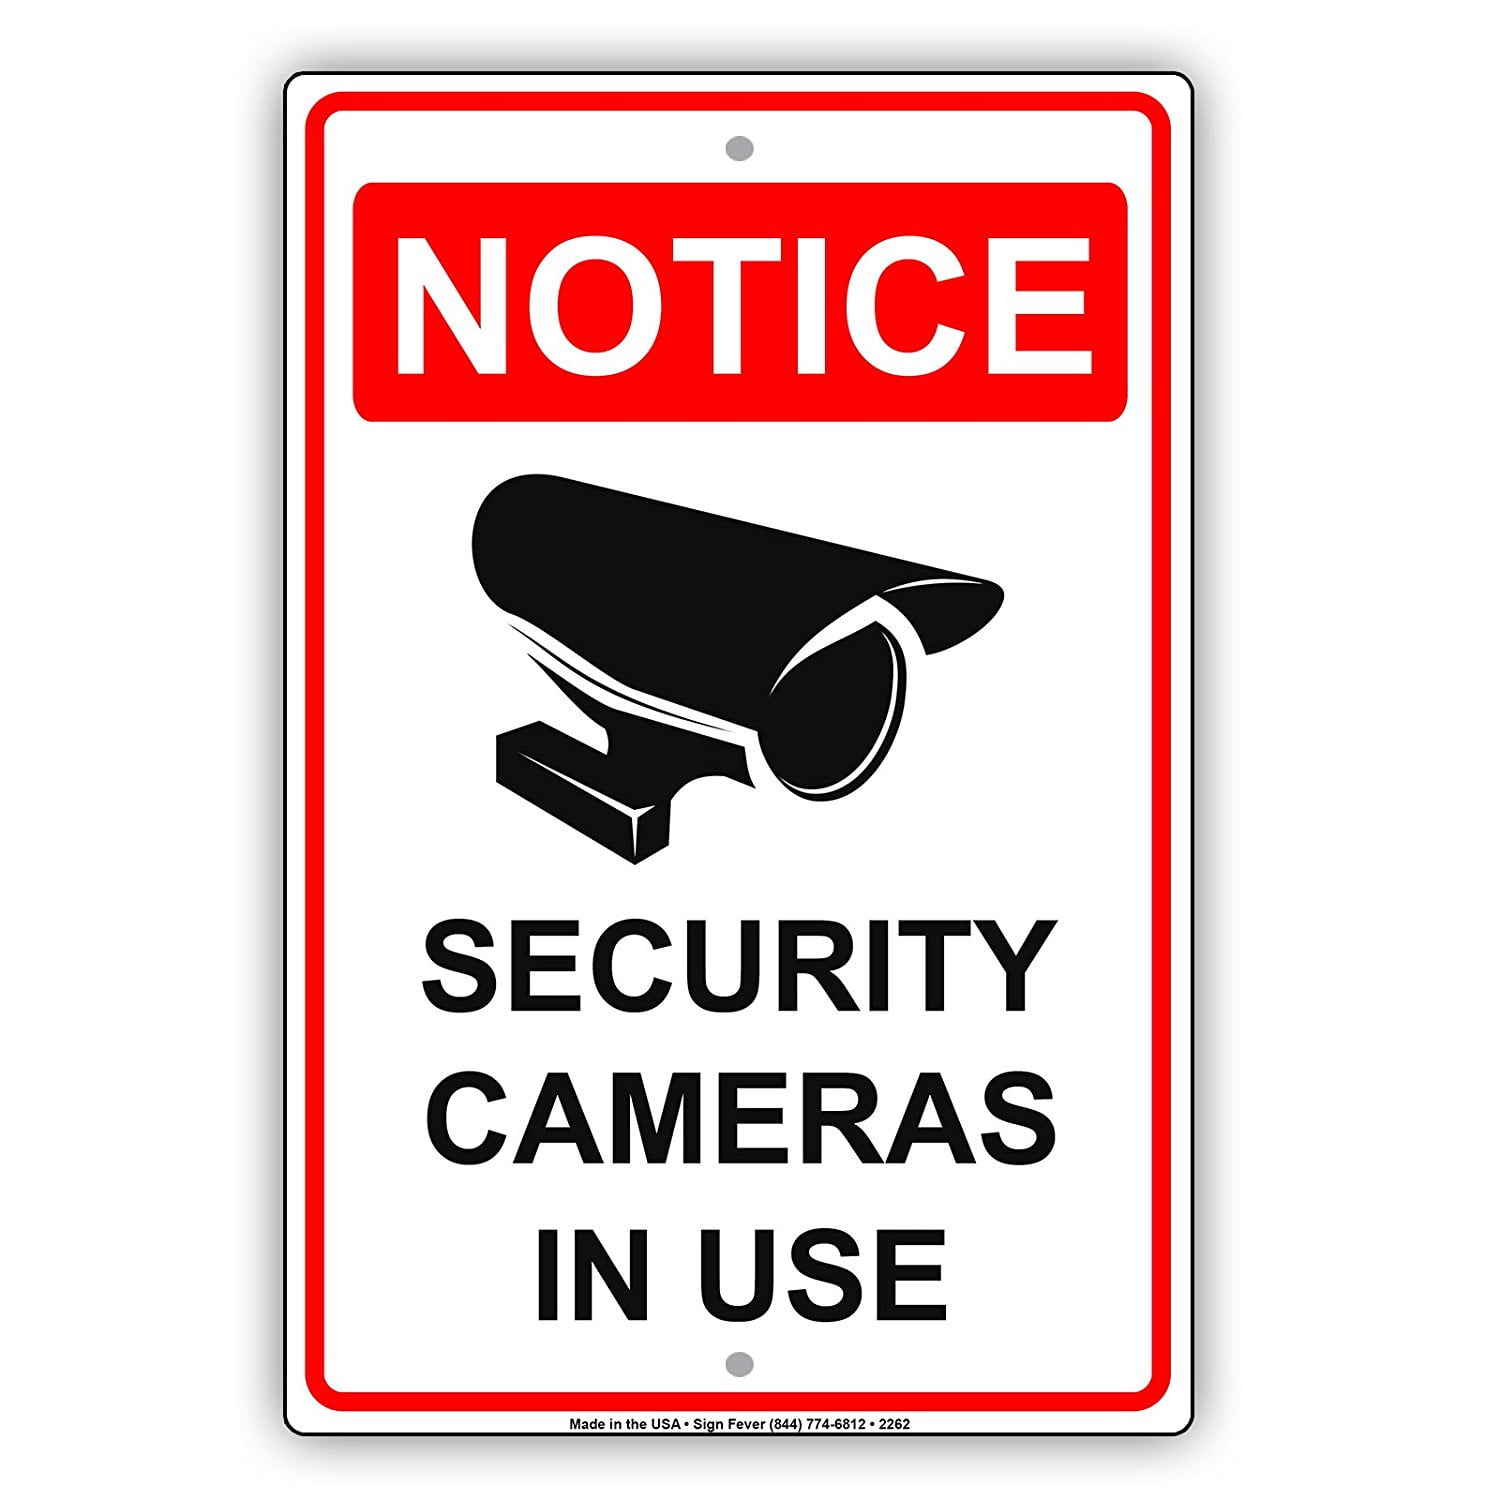 USED Warning Security Surveillance Cameras In Use 10x14 Aluminum METAL Yard Sign 